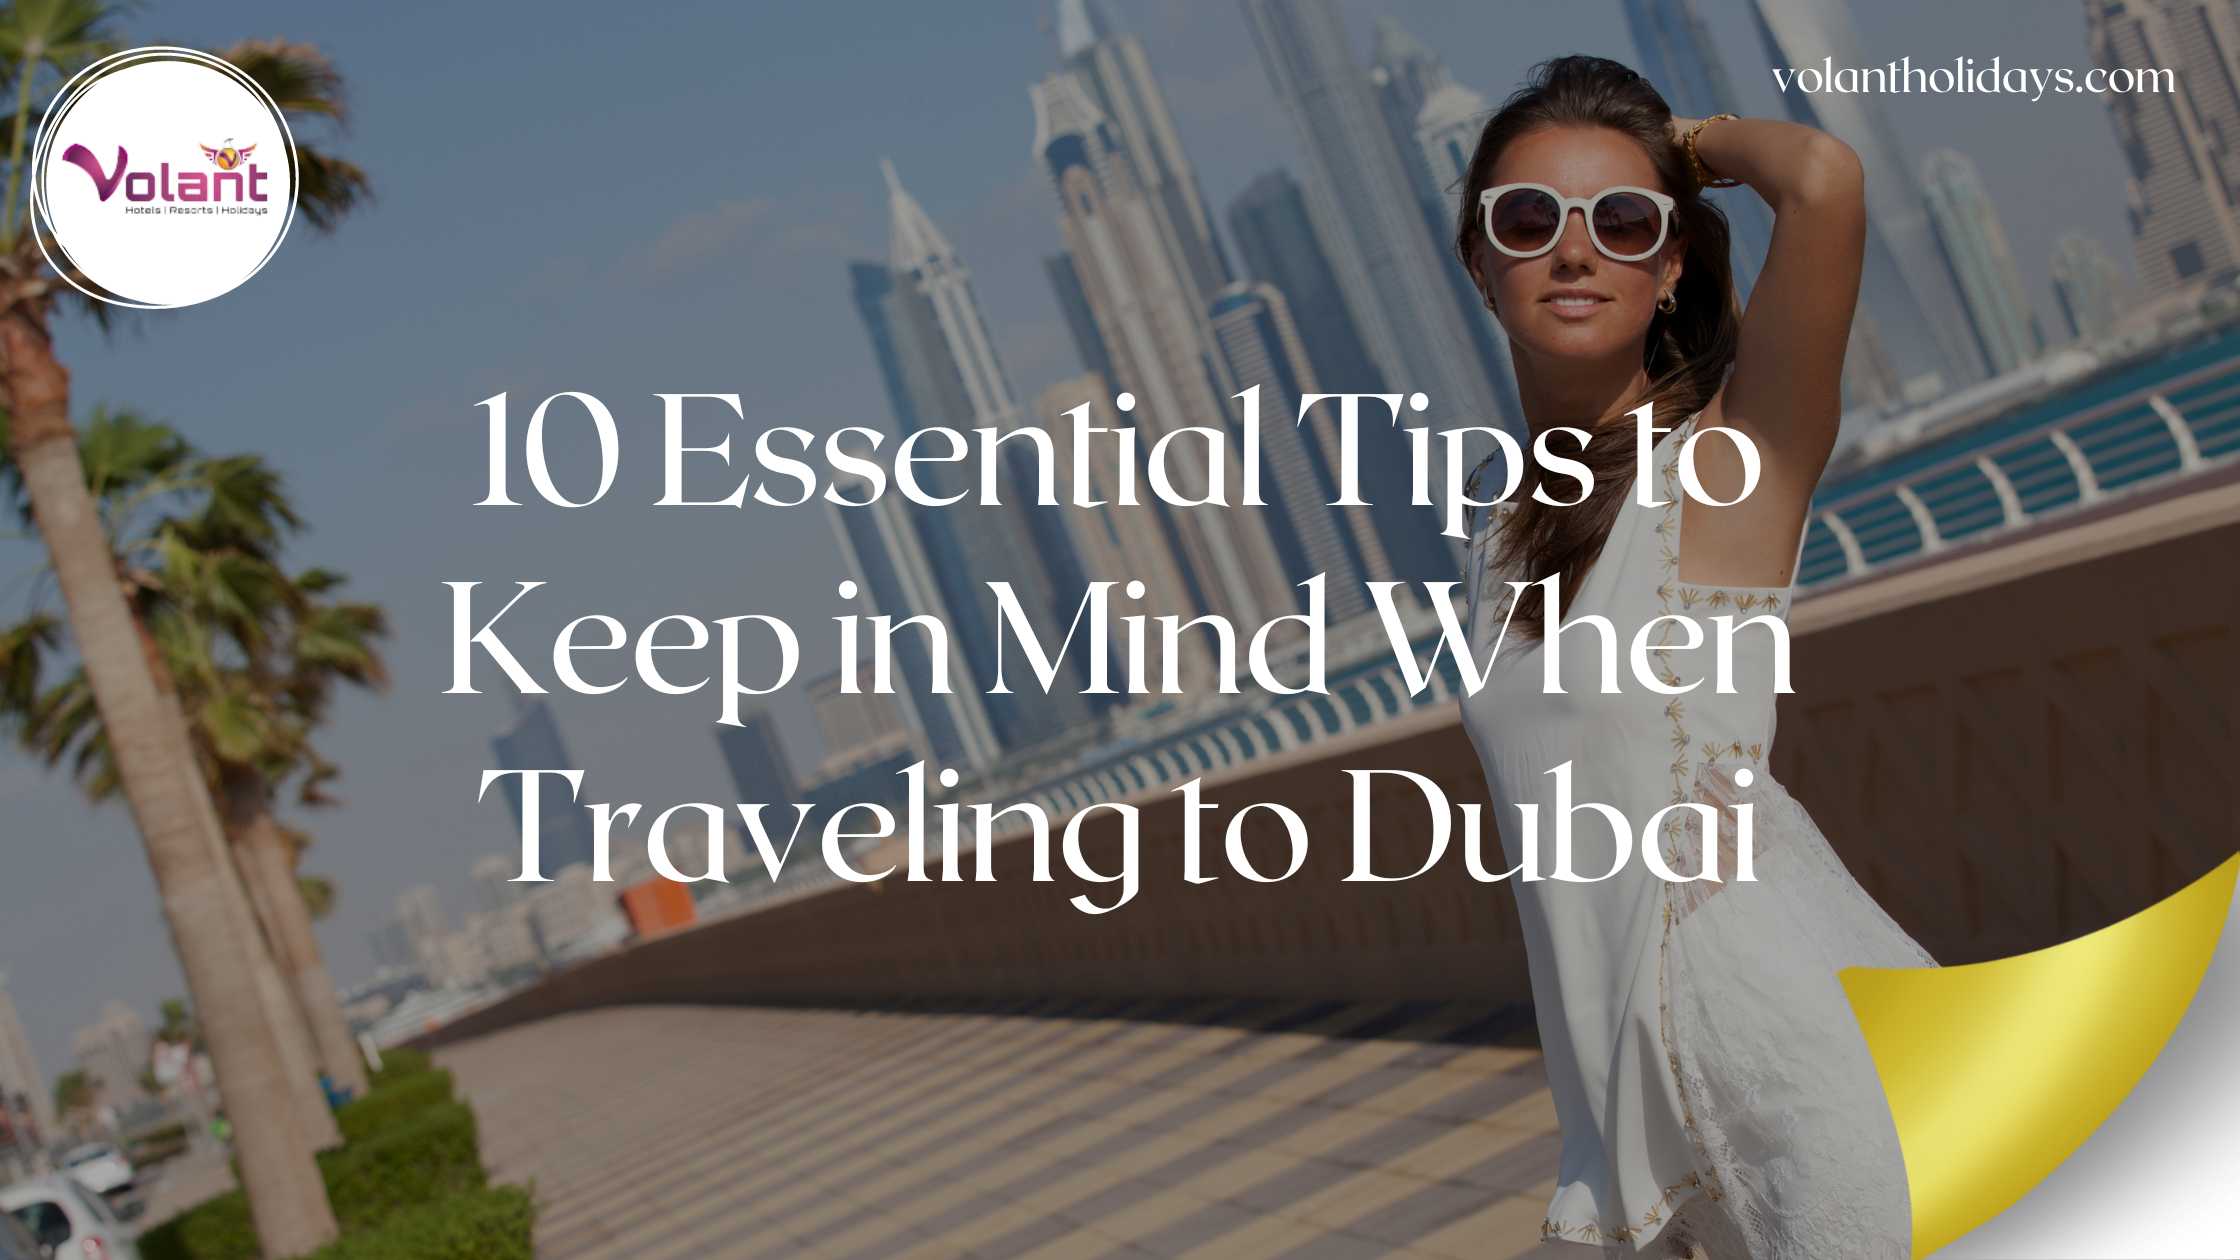 10 Essential Tips to Keep in Mind When Traveling to Dubai